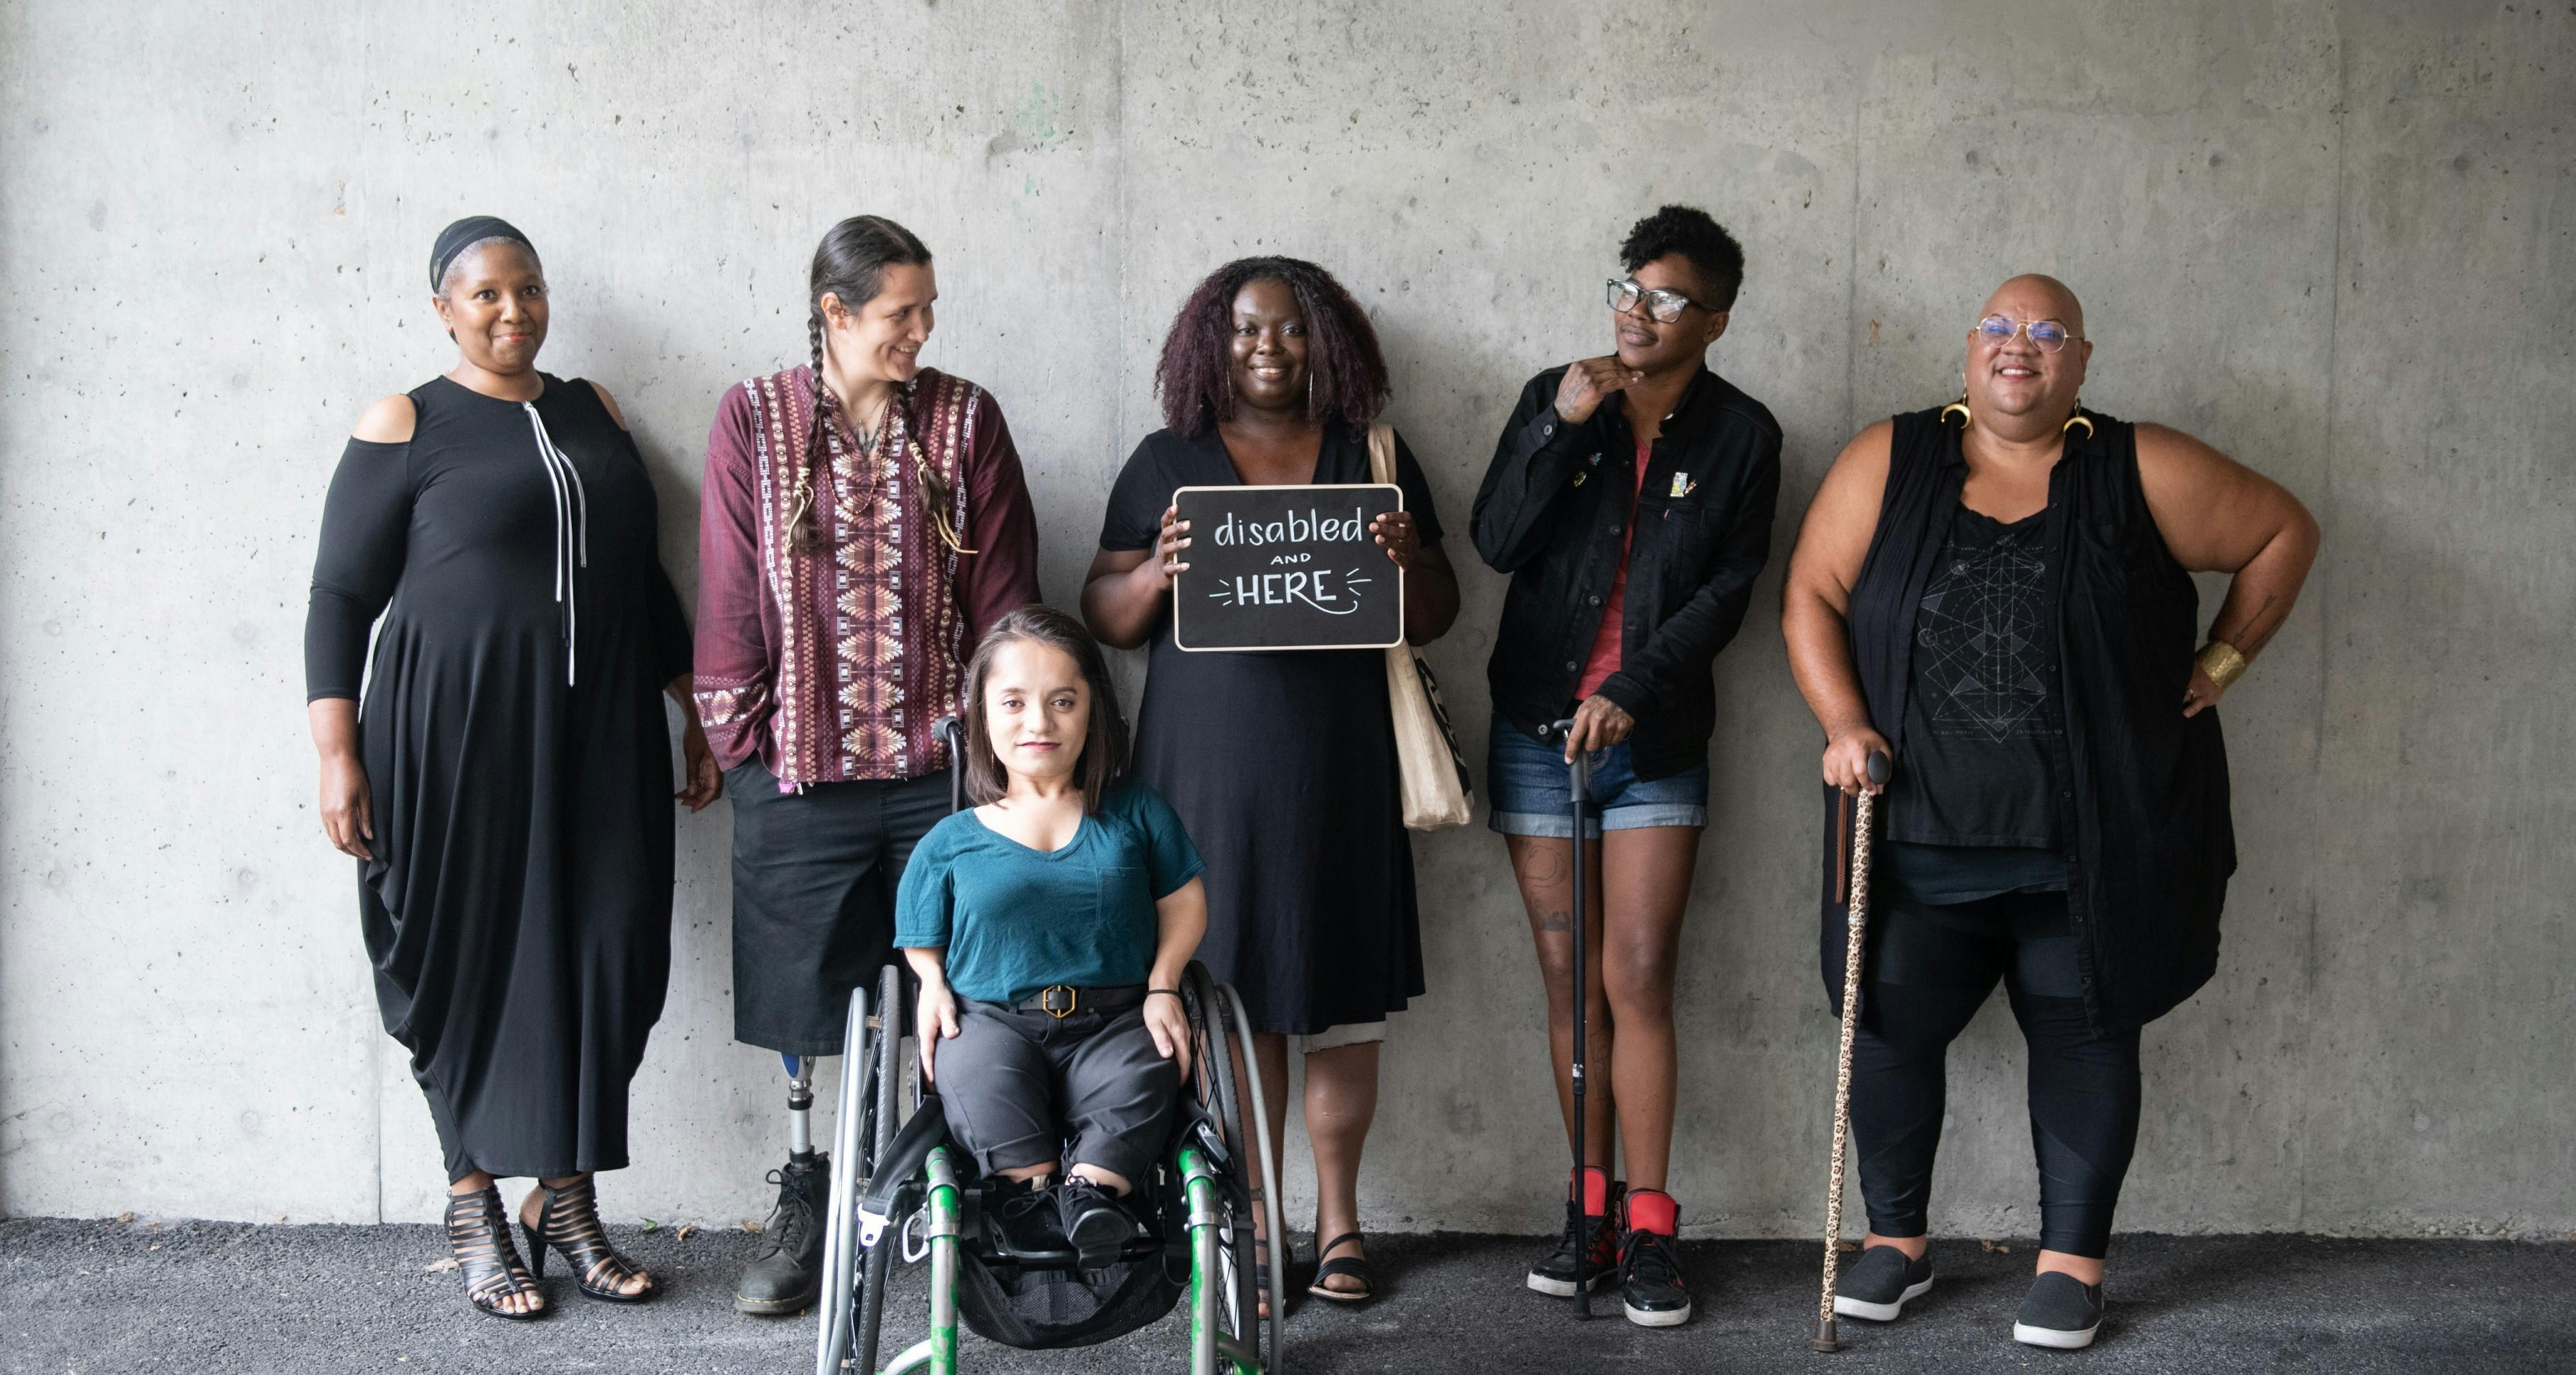 Six disabled people of color smile and pose in front of a concrete wall. Five people stand in the back, with the Black woman in the center holding up a chalkboard sign reading `disabled and here.` A South Asian person in a wheelchair sits in front. Photo attributed to Disabled and Here project.